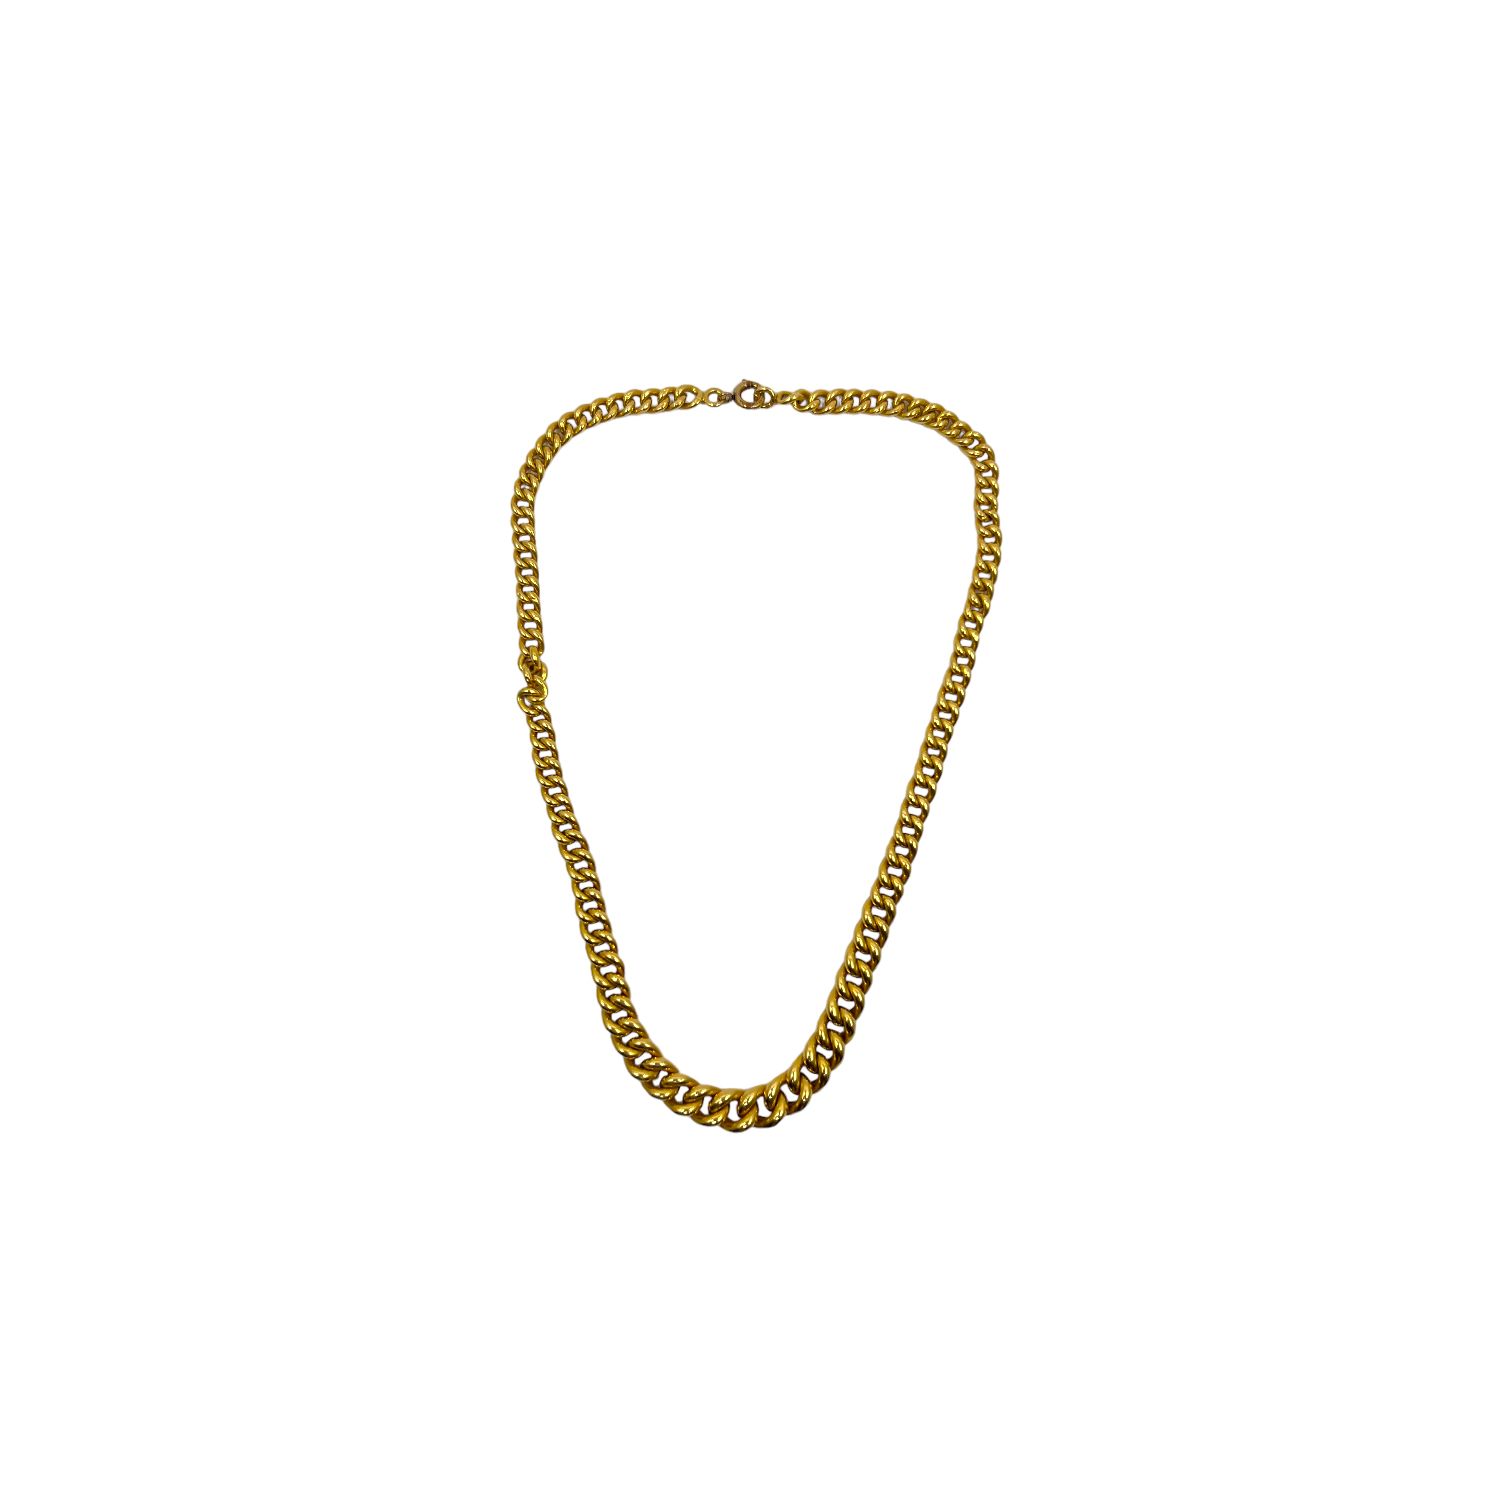 Null COLLIER maille gourmette en or jaune 750° 
Poids : 19,07 g